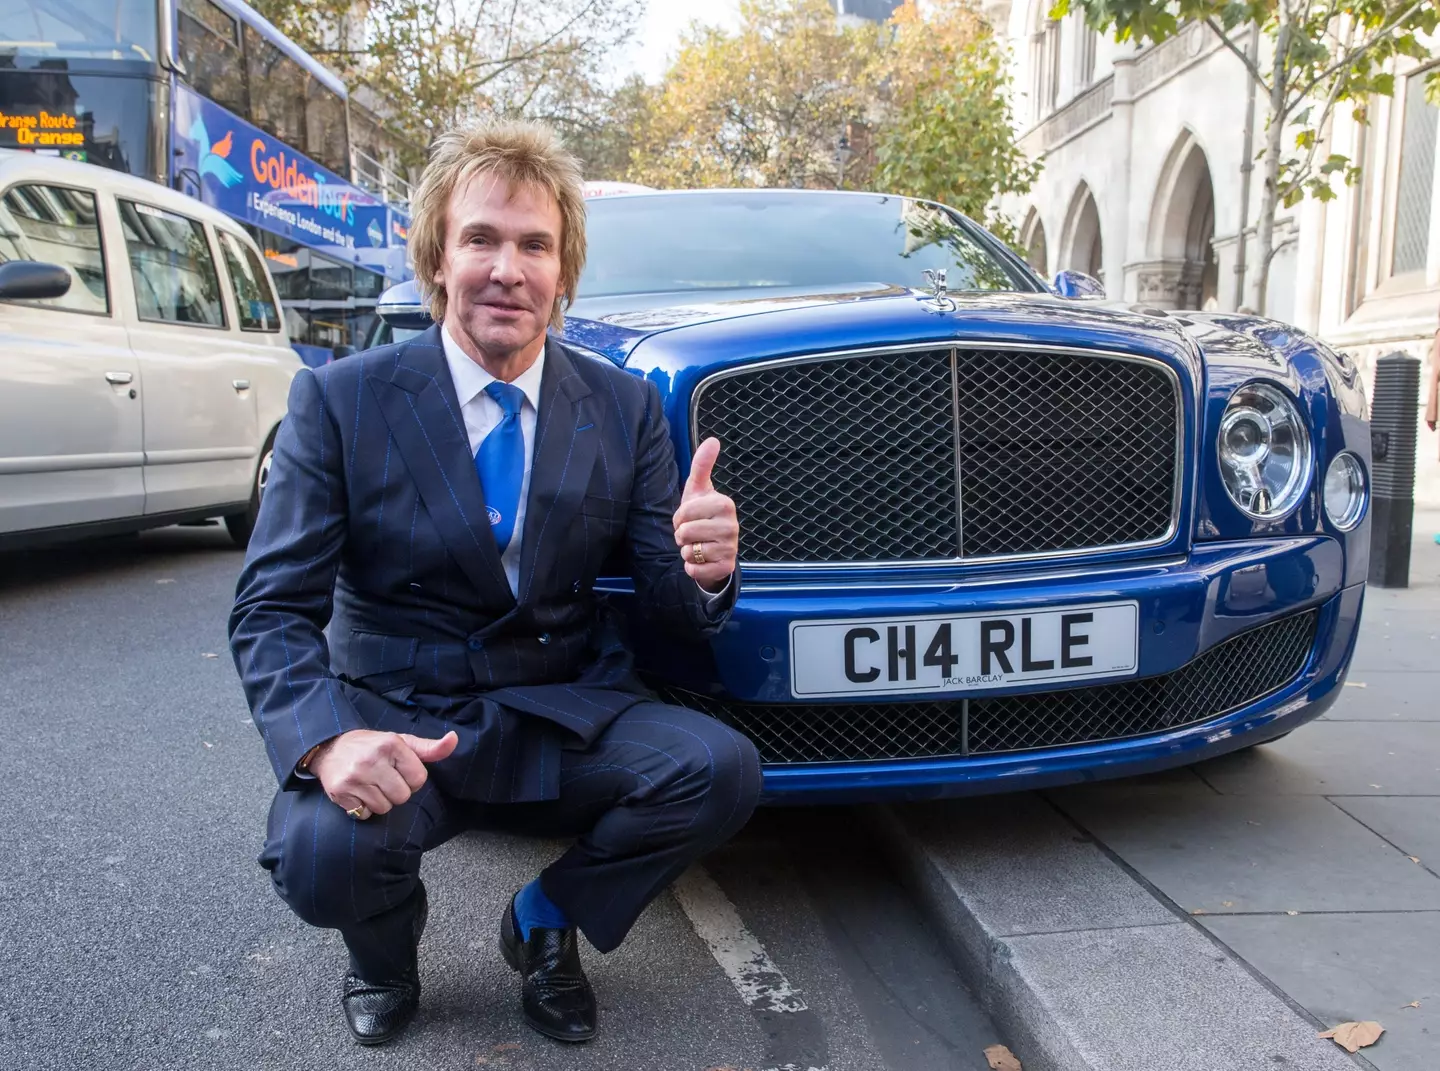 Pimlico Plumbers founder Charlie Mullins has been criticised for his joke.